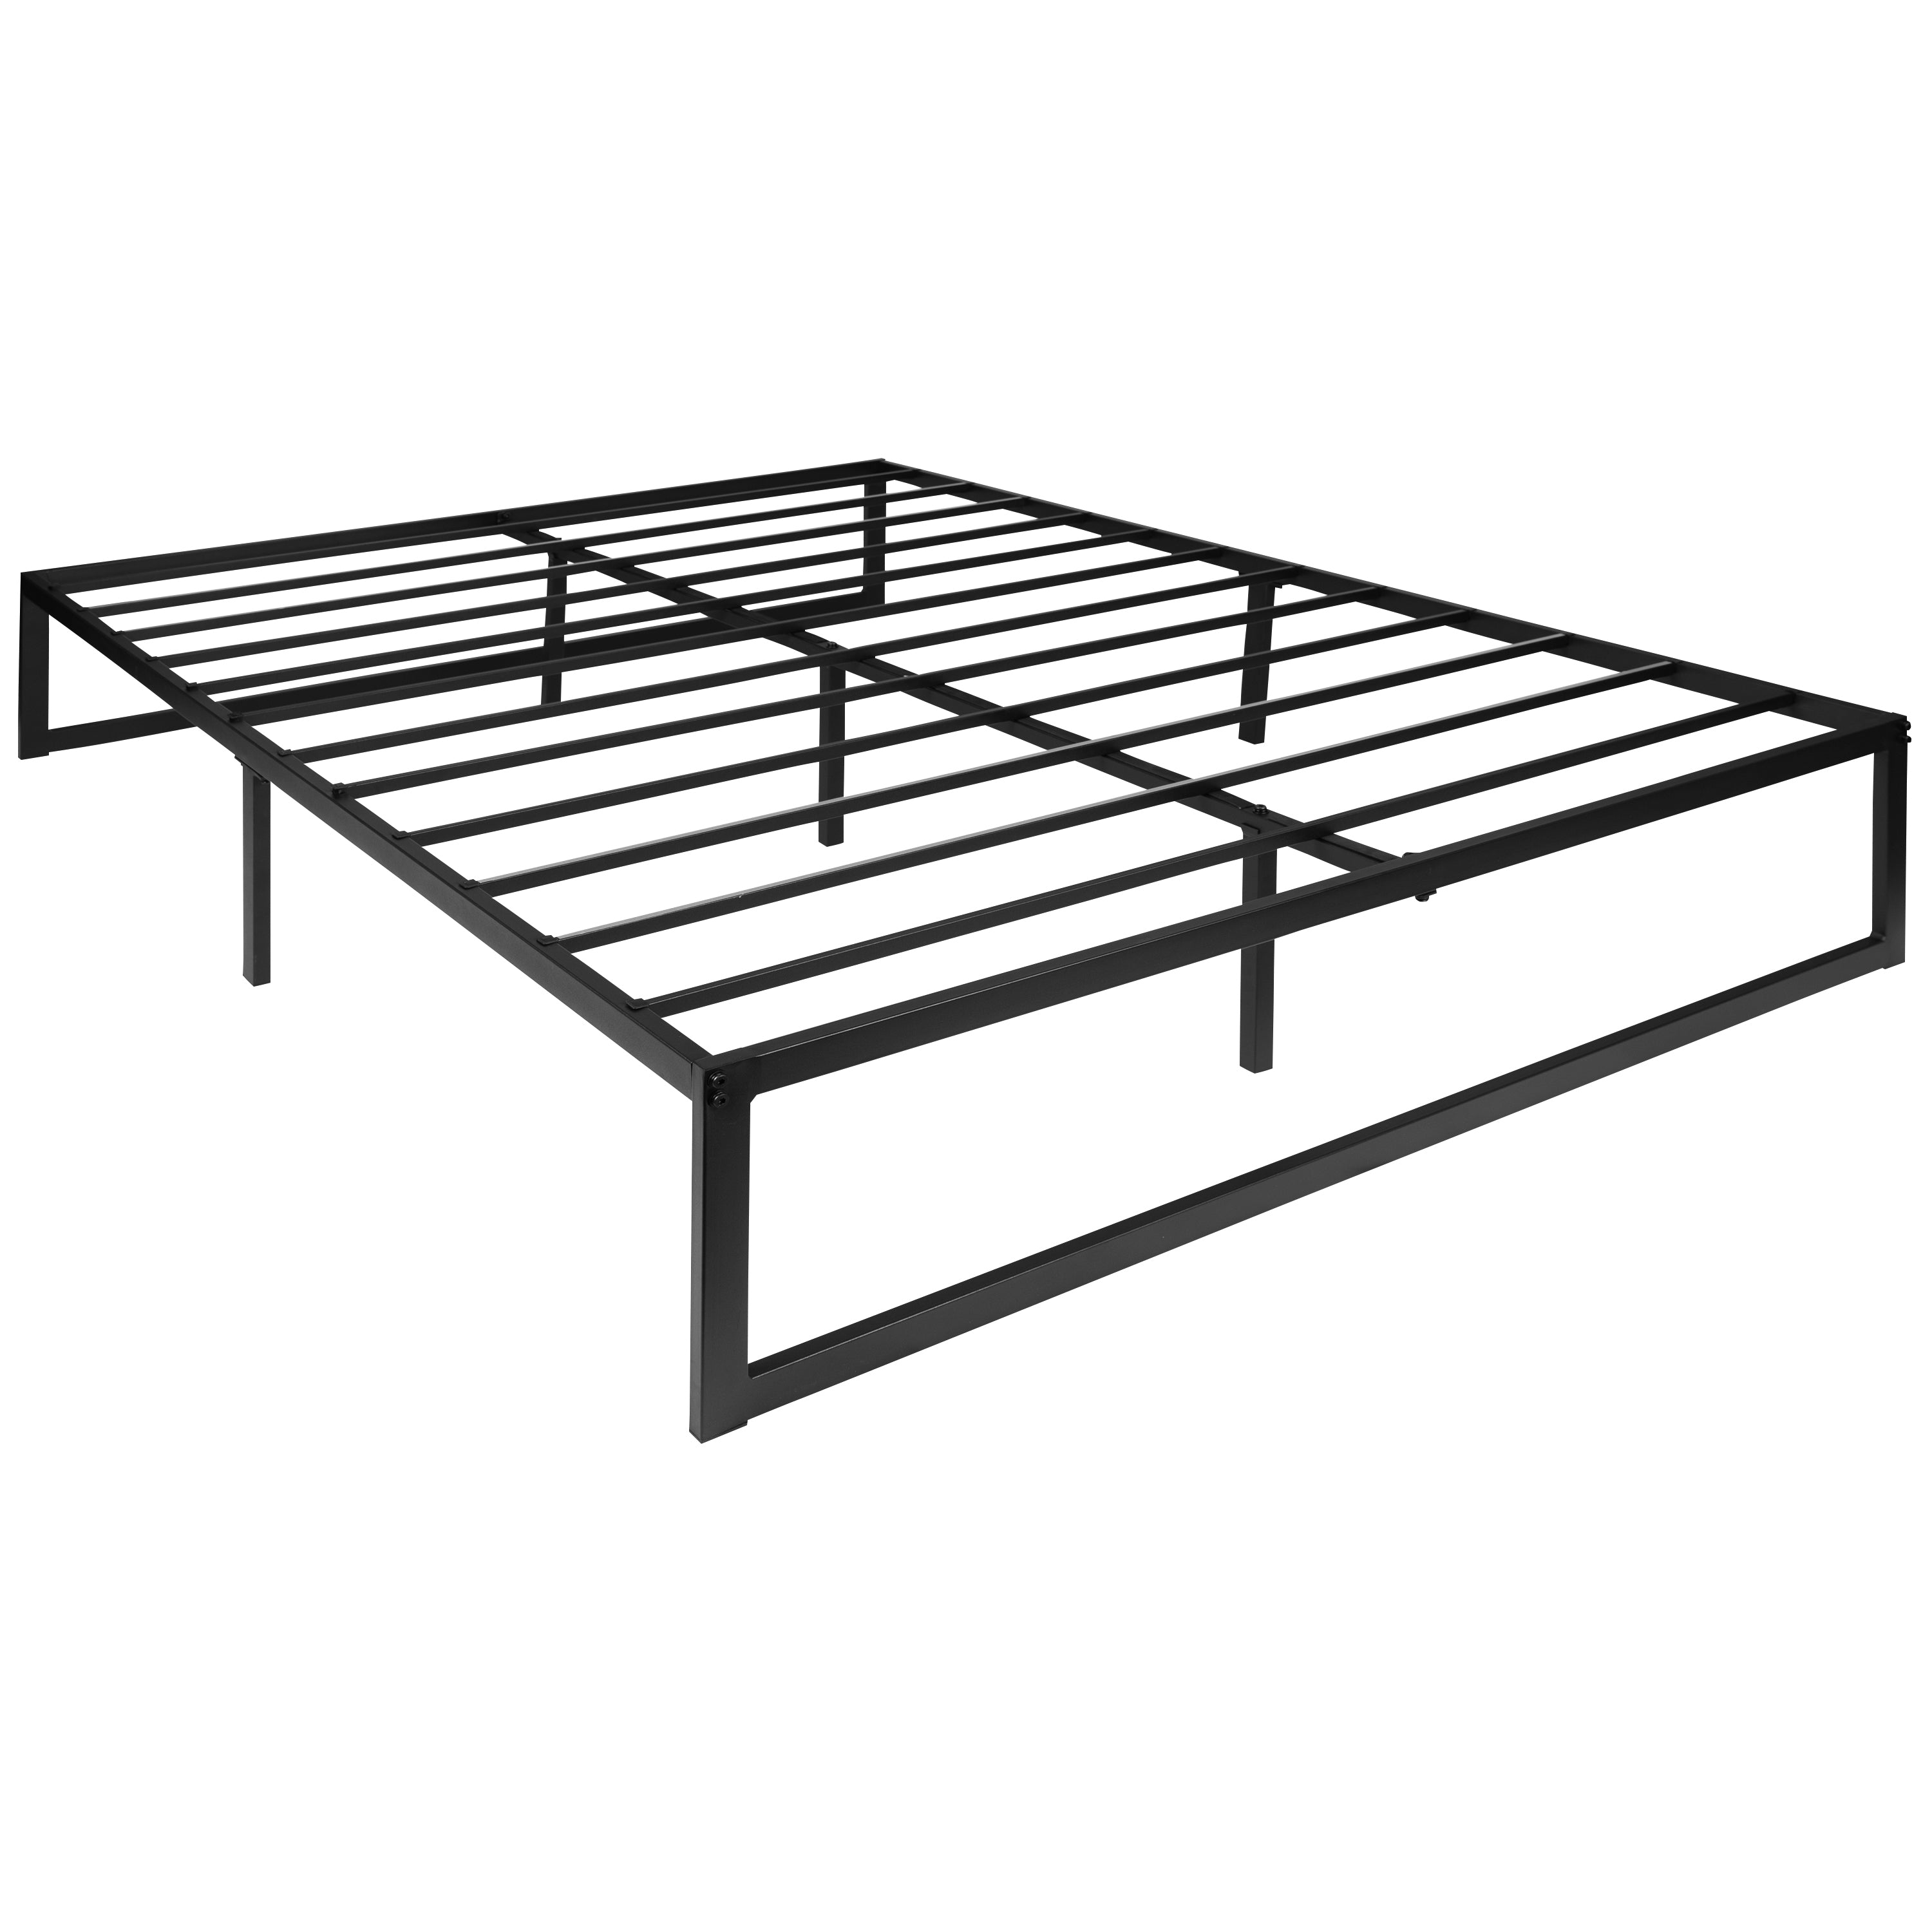 14 Inch Metal Platform Bed Frame with 12 Inch Pocket Spring Mattress in a Box and 3 inch Cool Gel Memory Foam Topper-Bed & Mattress-Flash Furniture-Wall2Wall Furnishings